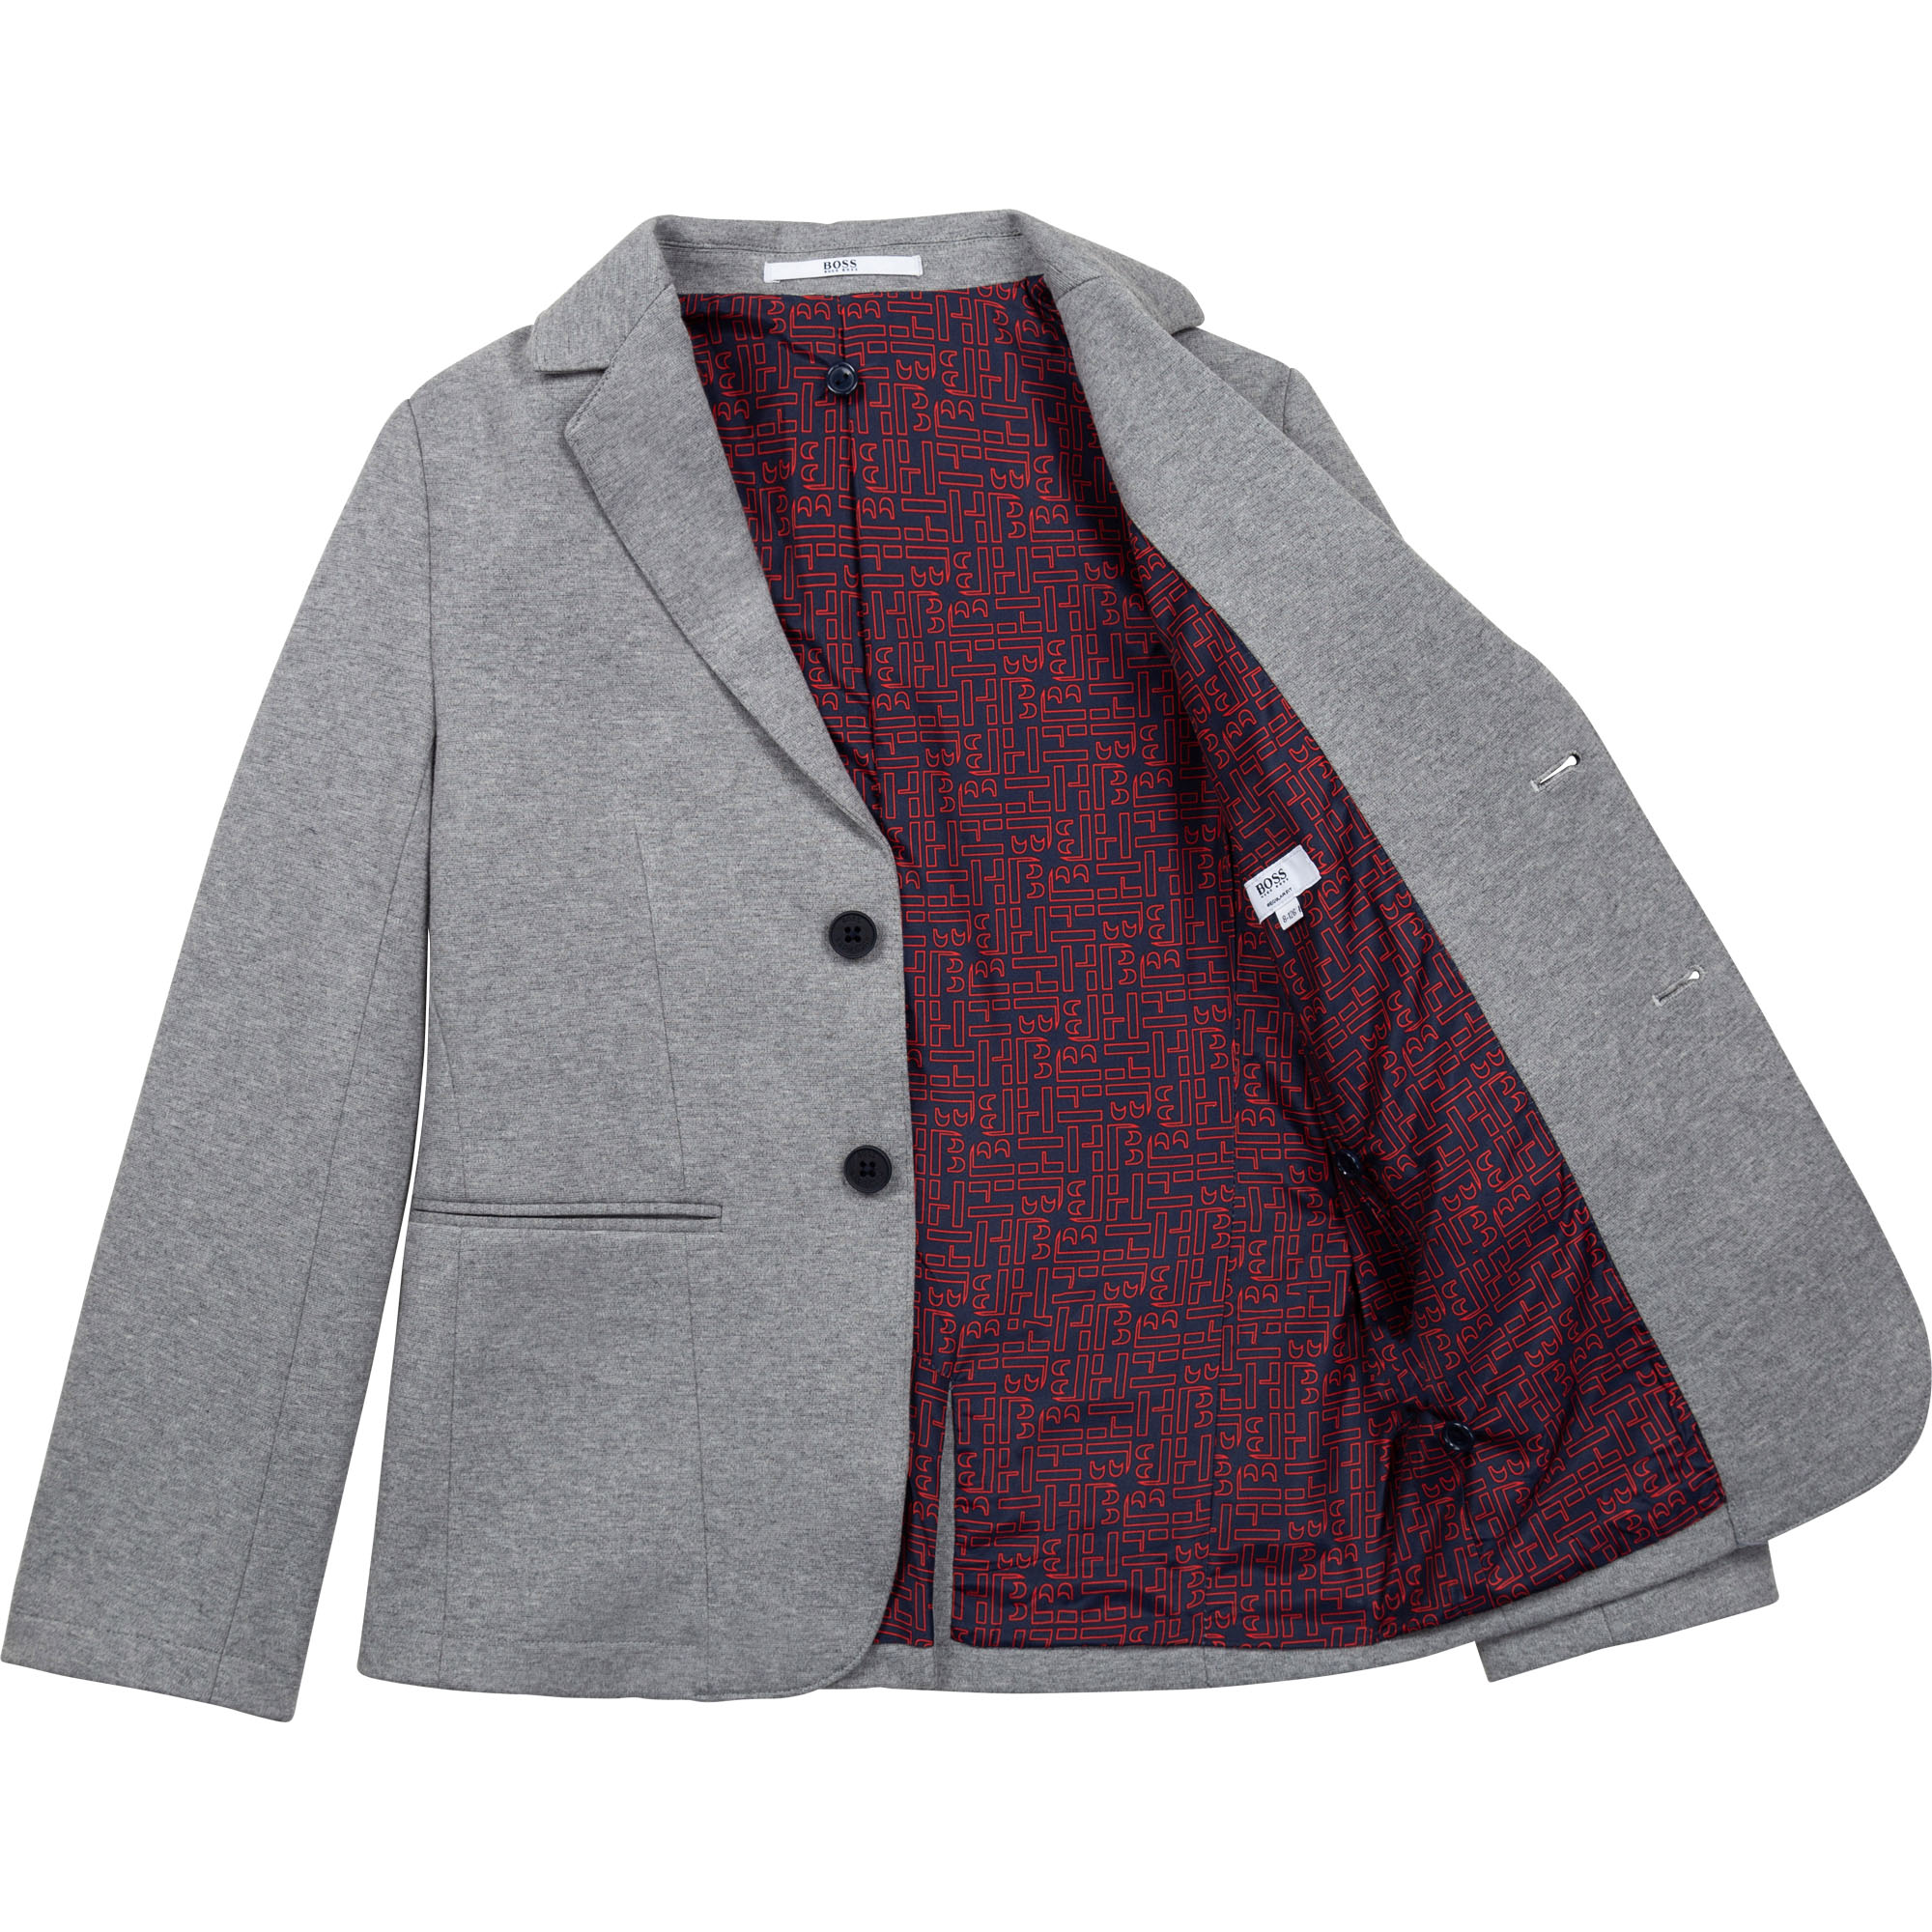 2-in-1 milano suit jacket BOSS for BOY